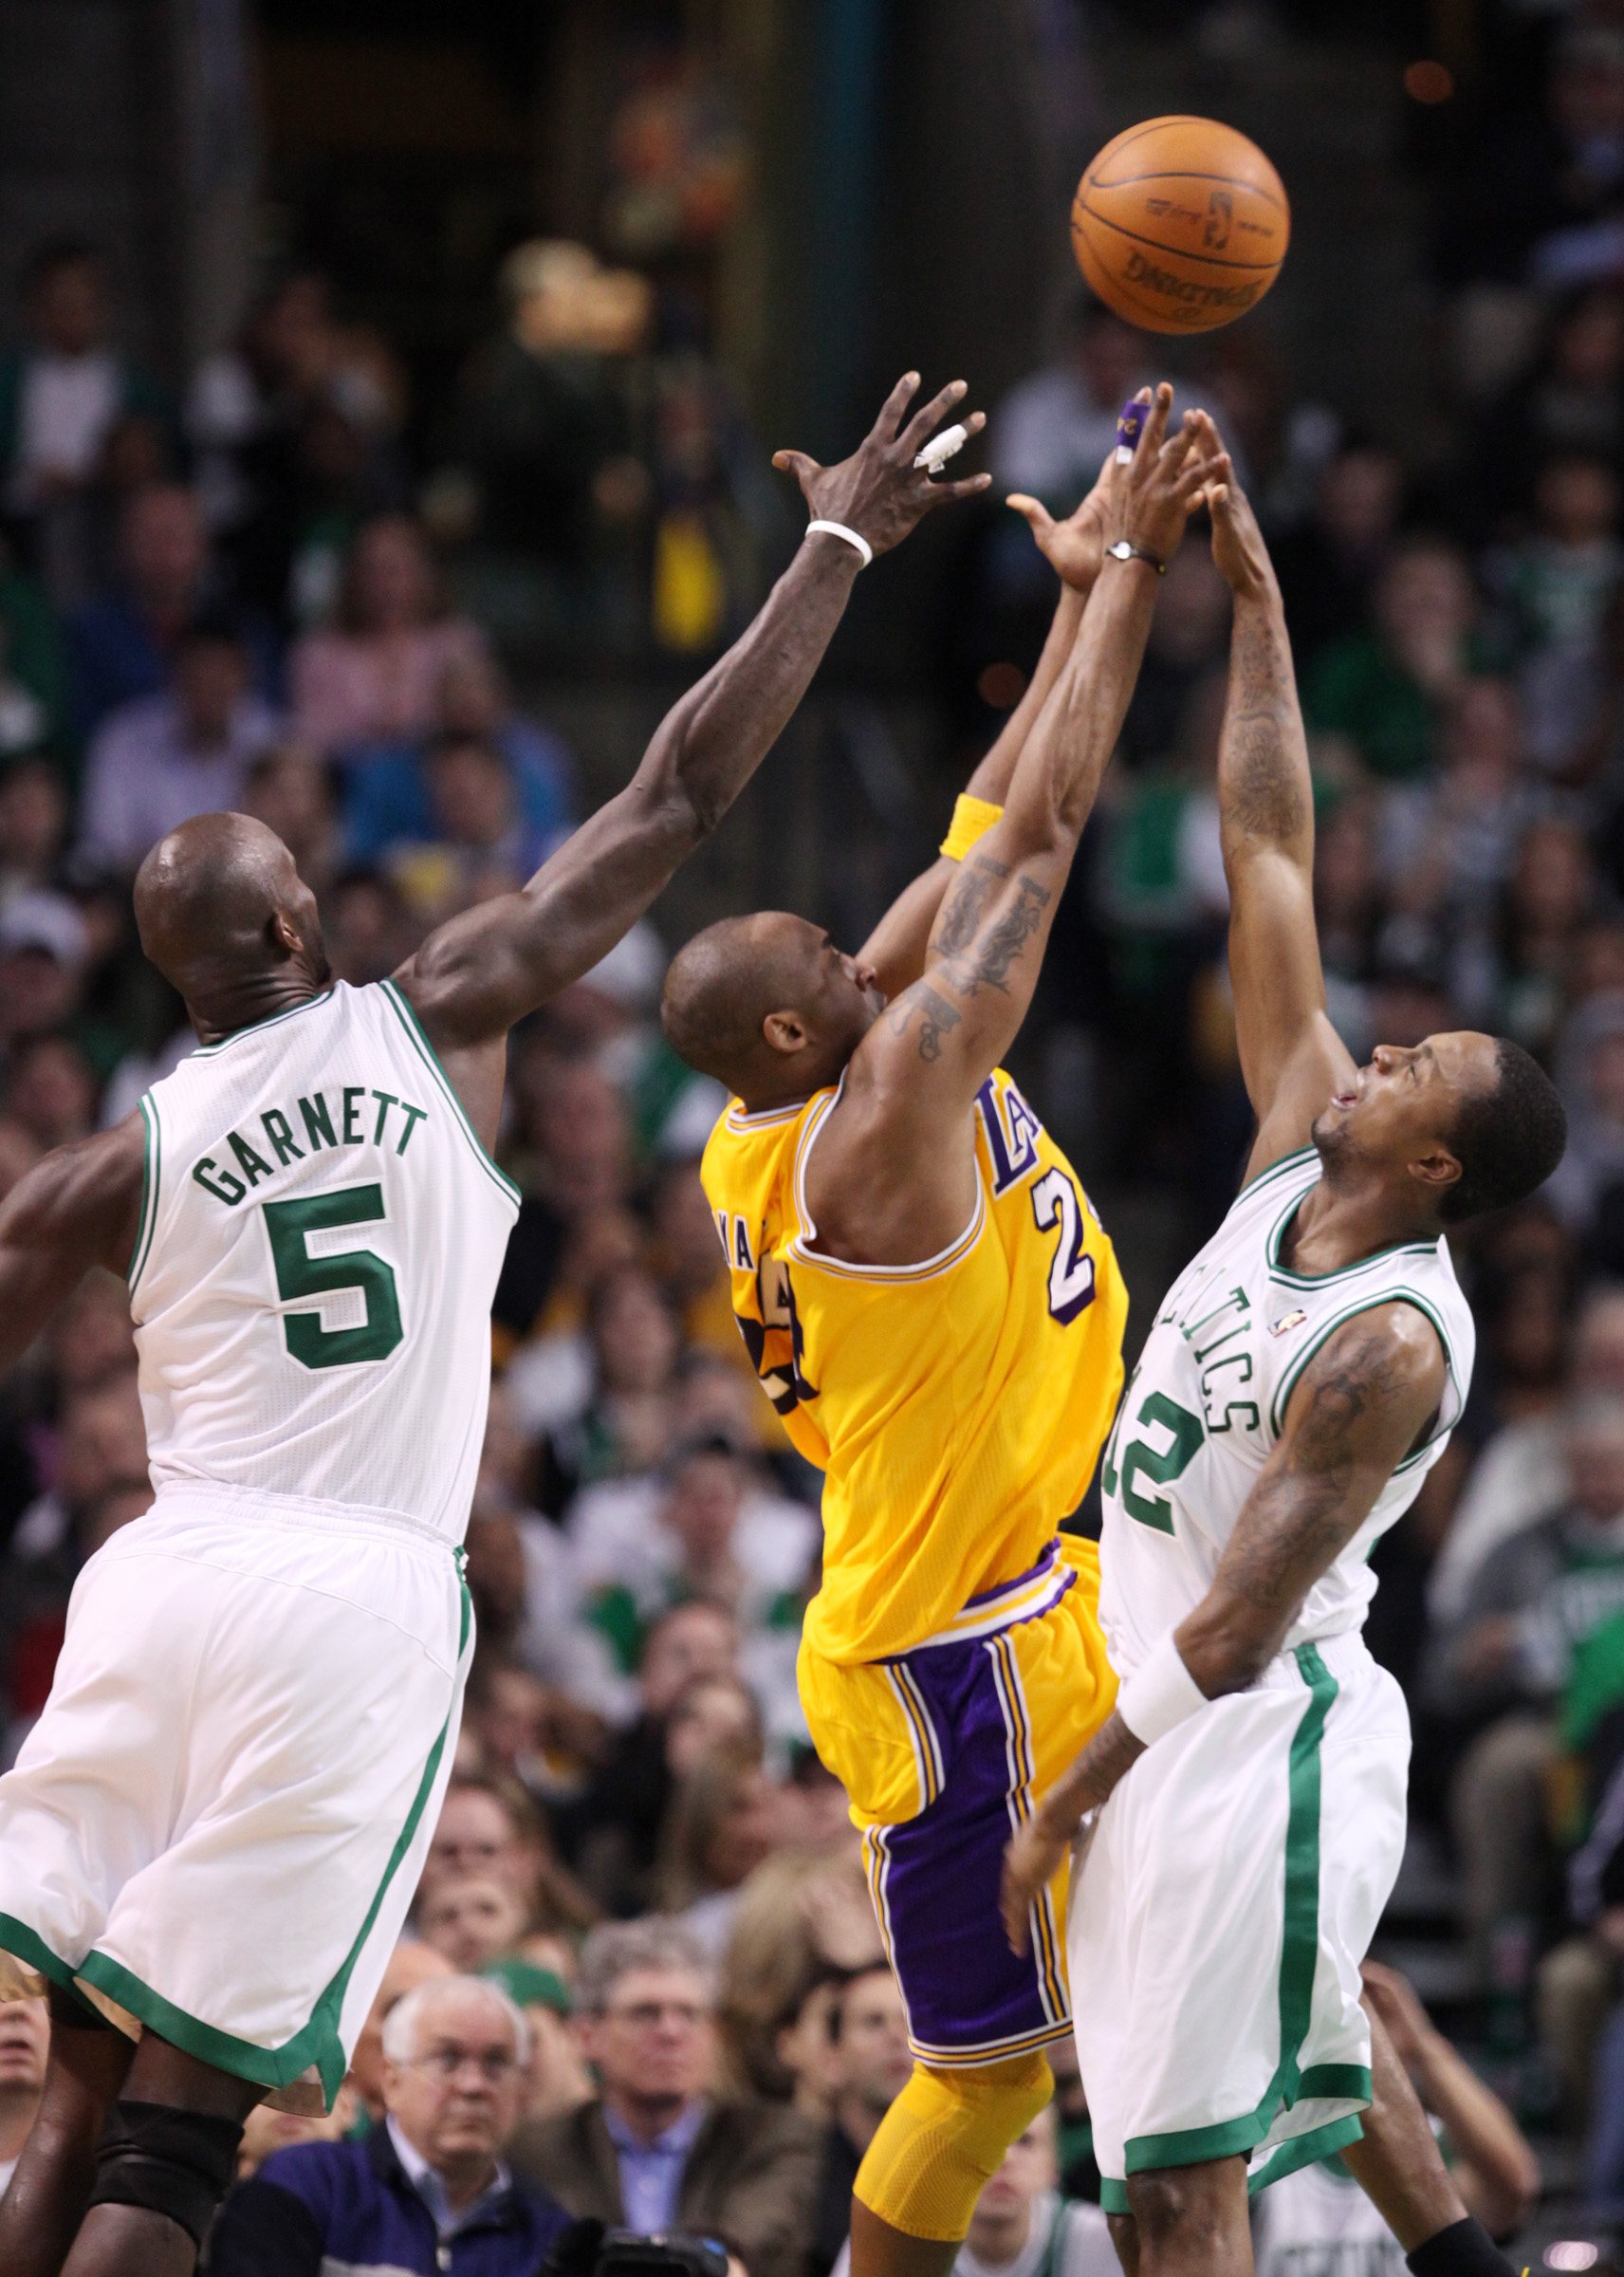 Celtics vs. Lakers at the Garden | Nate Photography1712 x 2400